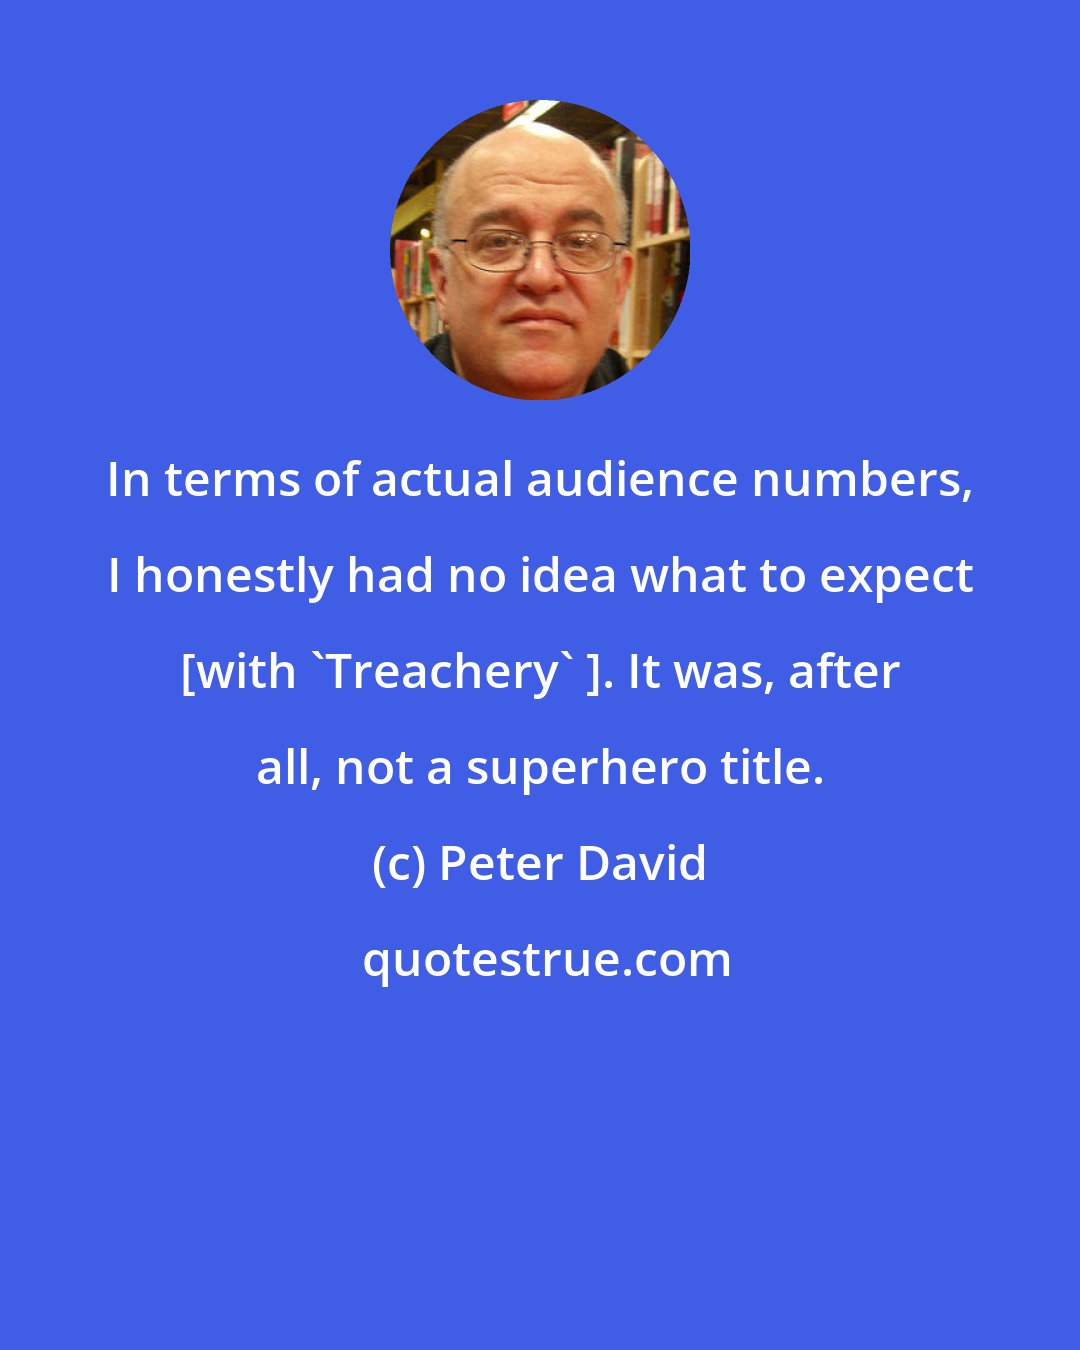 Peter David: In terms of actual audience numbers, I honestly had no idea what to expect [with 'Treachery' ]. It was, after all, not a superhero title.